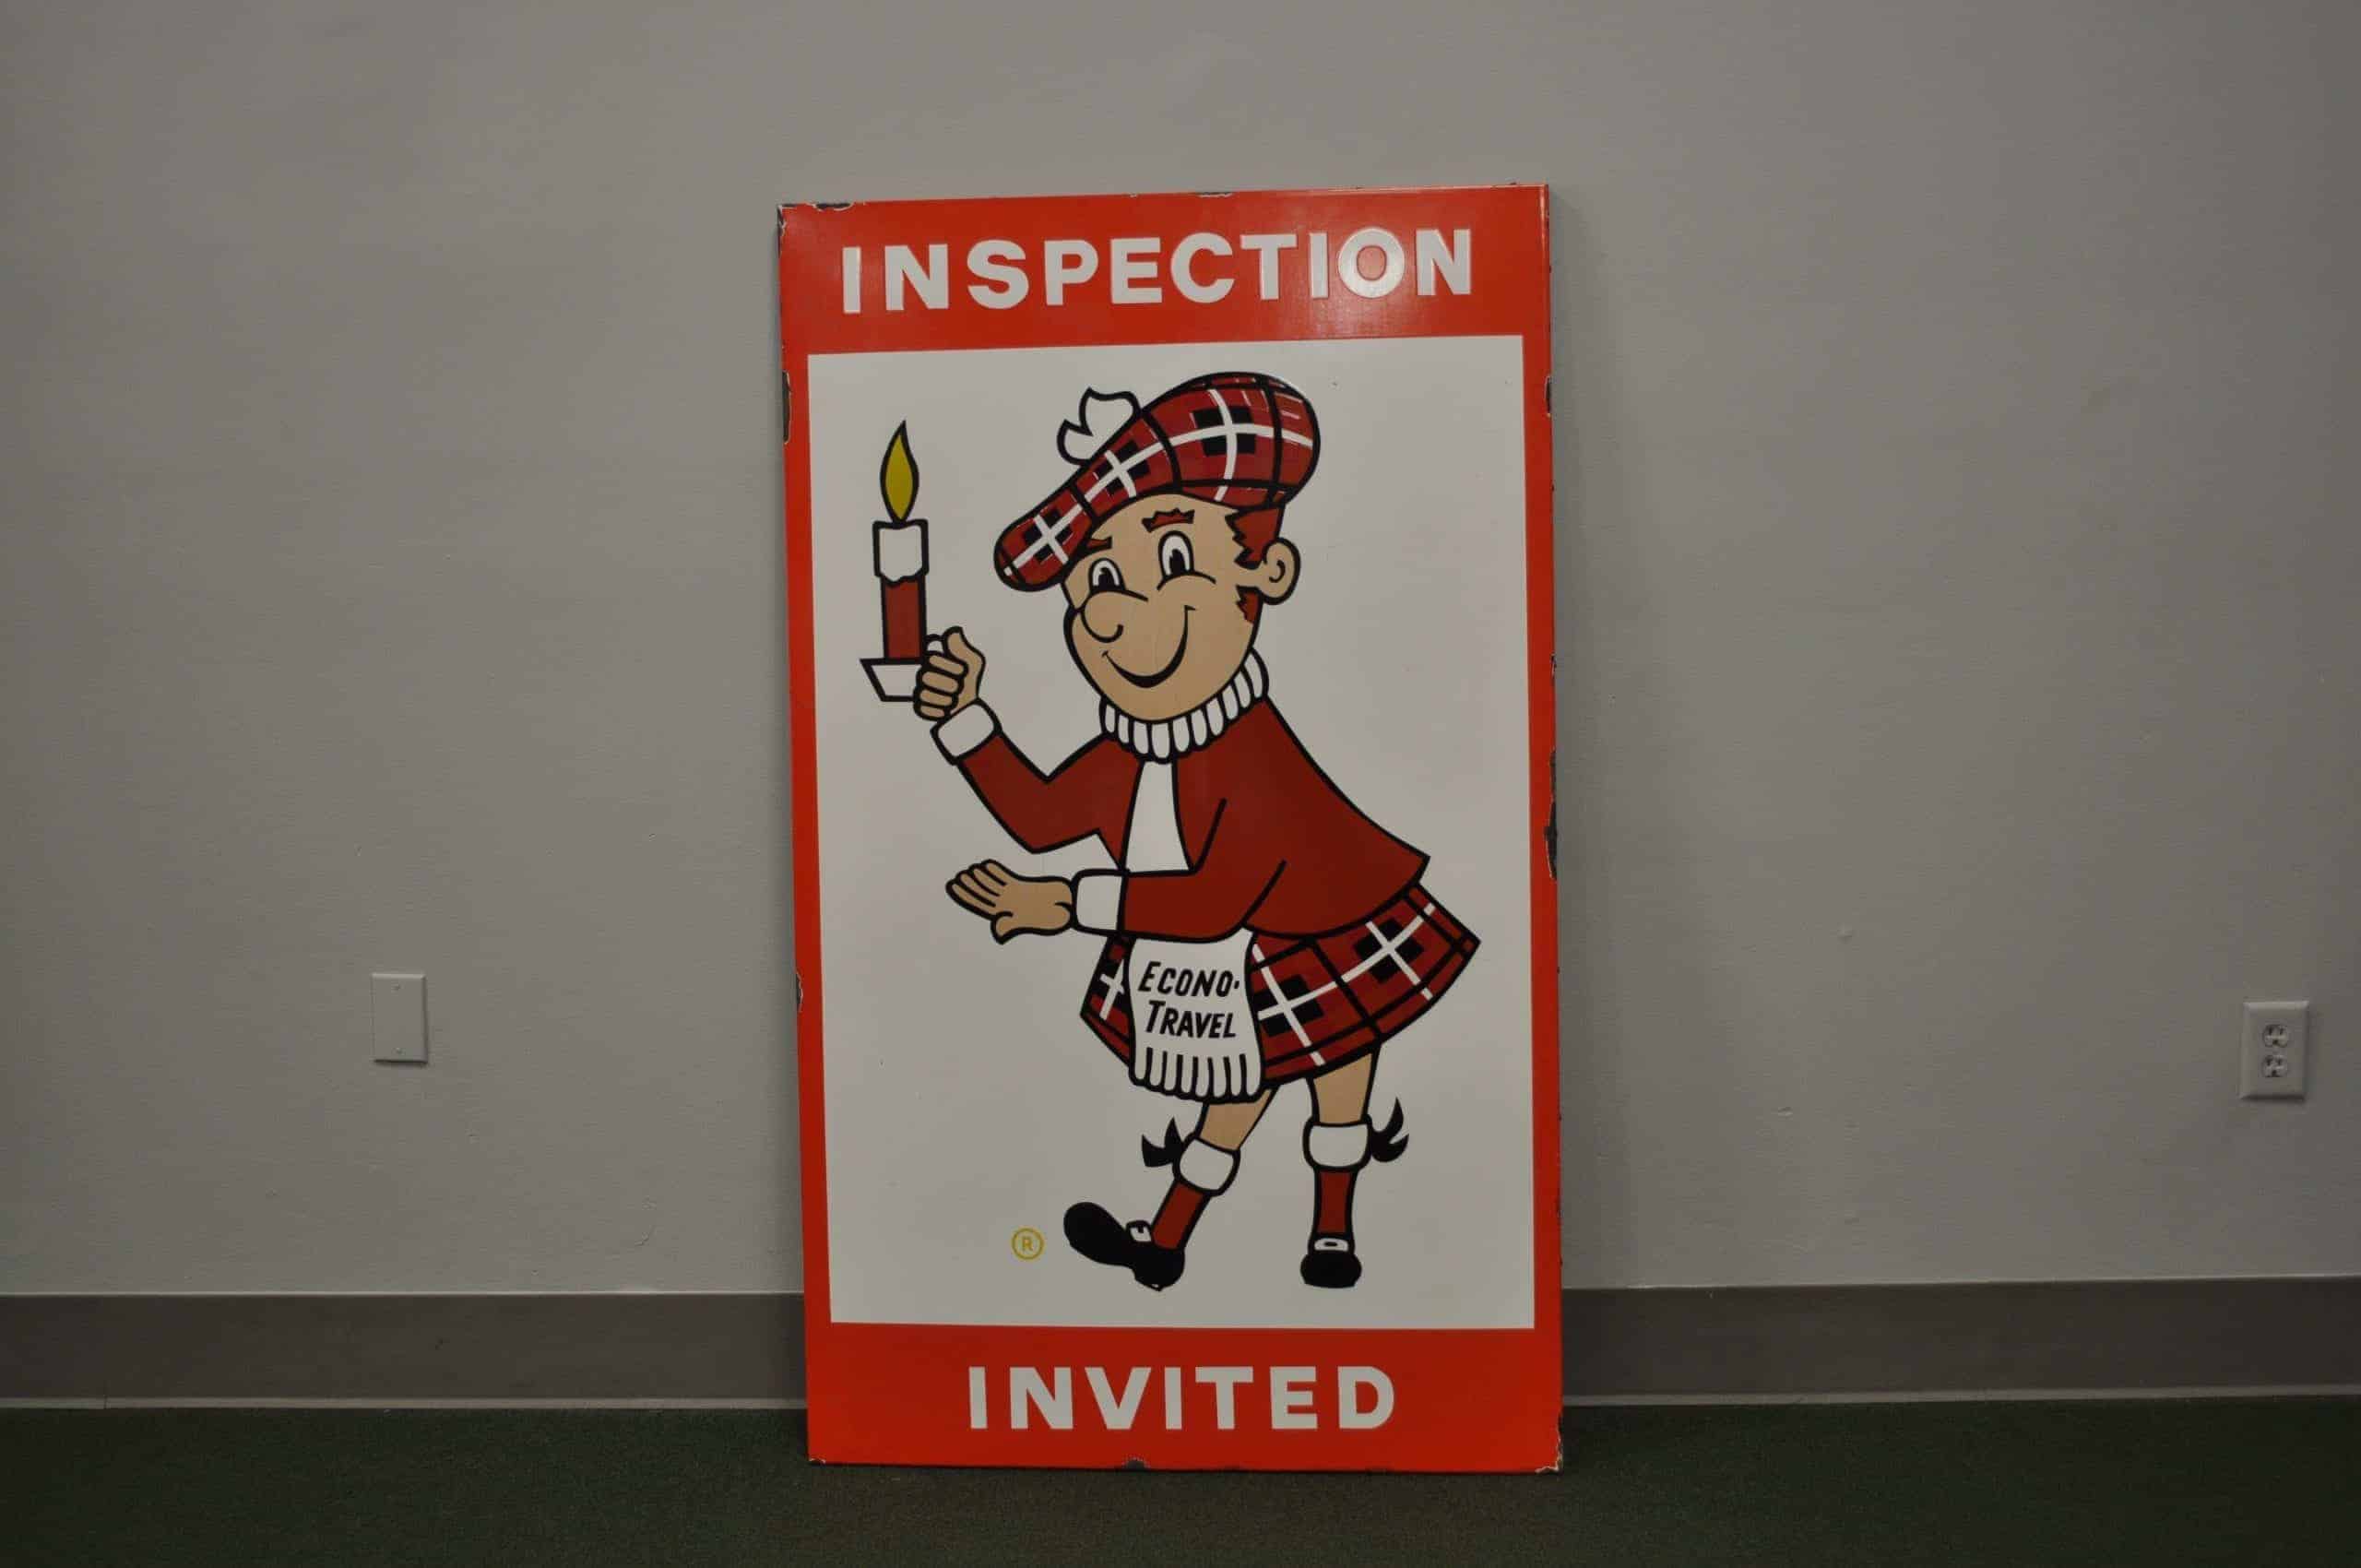 Econo Travel Inspection Invited Porcelain Sign